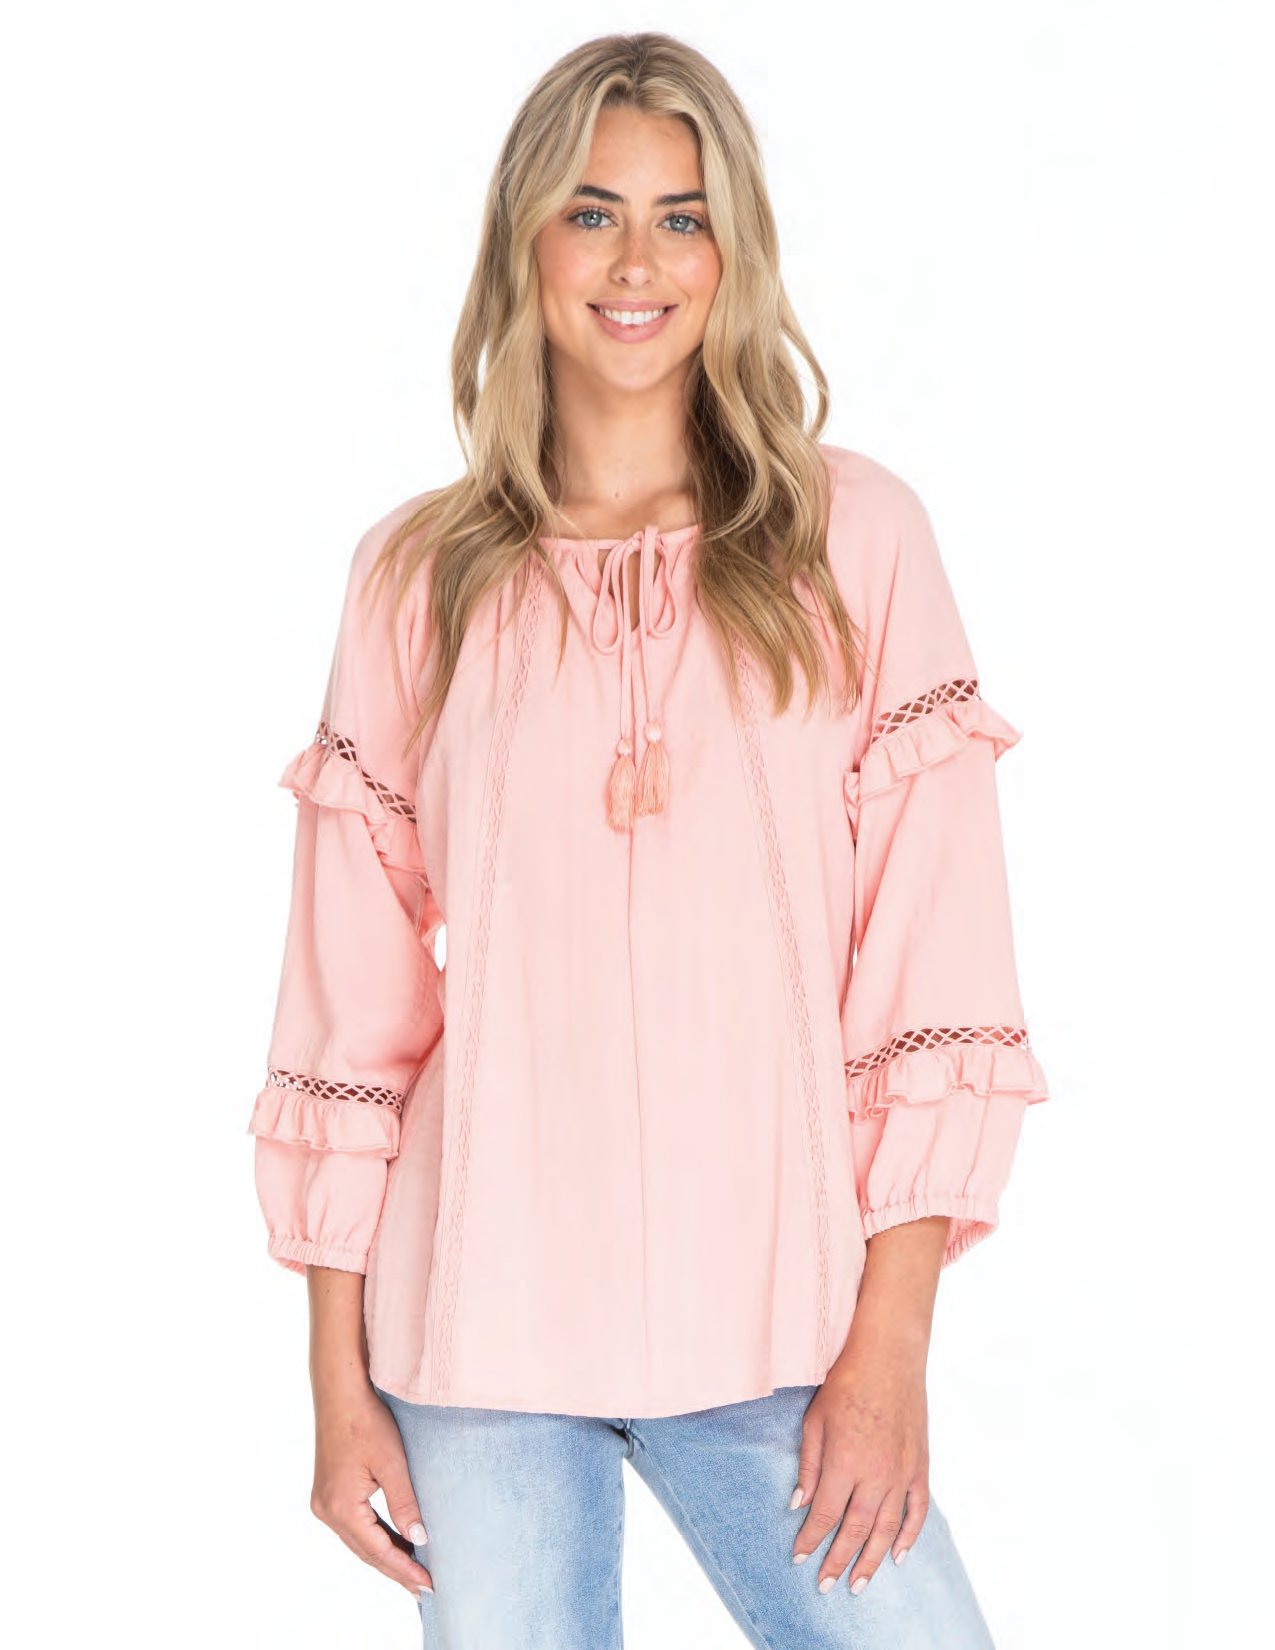 Lace & Ruffle Tie Neck Top-3/4 Sleeve, 3/4 sleeves, clothing, Lace, Light Pink, Ruffle Detail, Sale, Tie Neck, Top, Tops, Women, women's-XS-[option4]-[option5]-[option6]-Bella Bliss Boutique in Texas